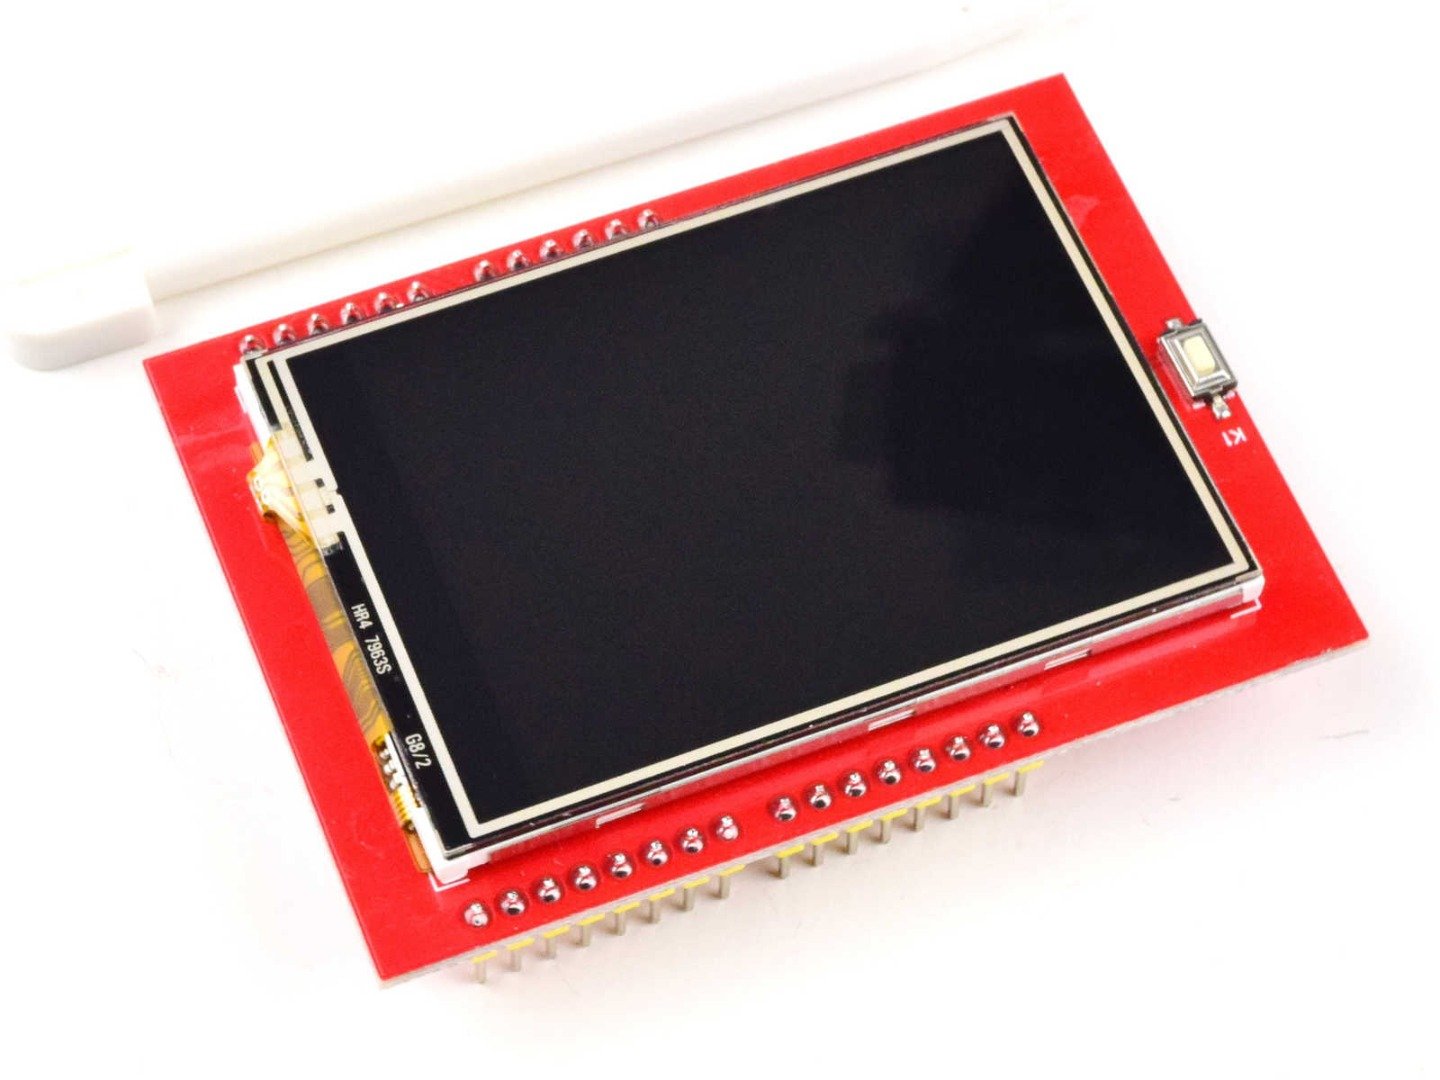 Touch Display for Arduino